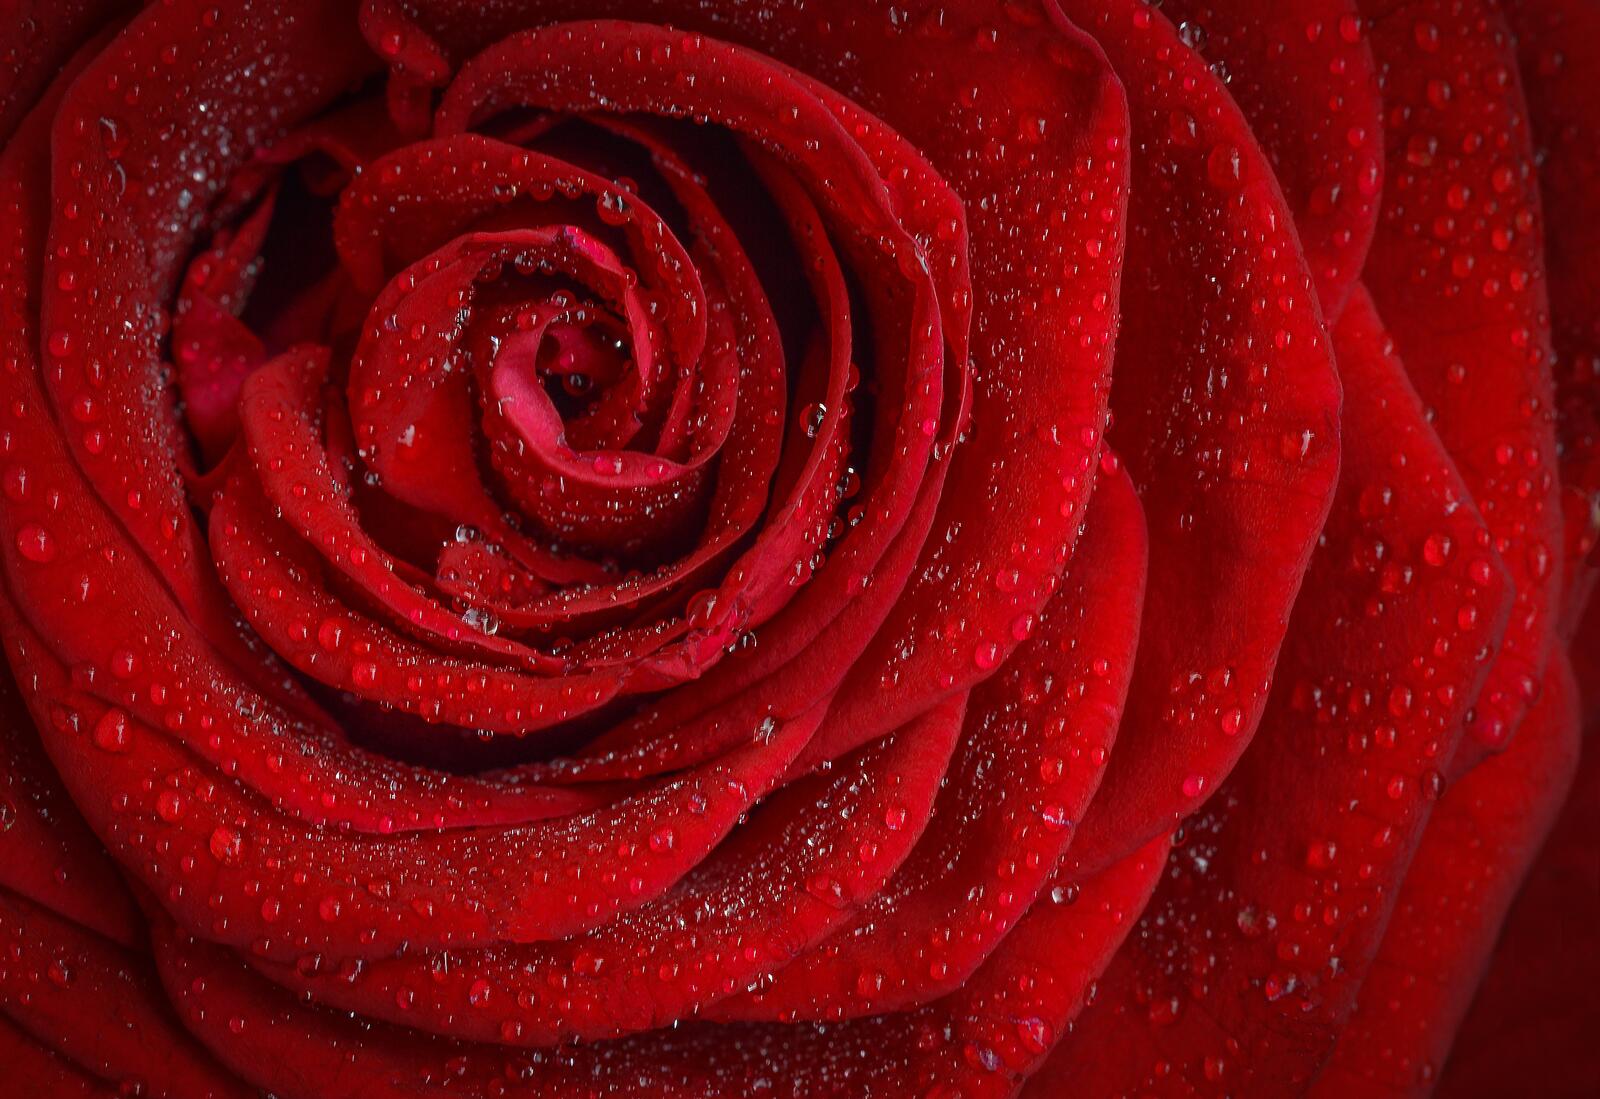 Free photo Bright red rosebud with water droplets